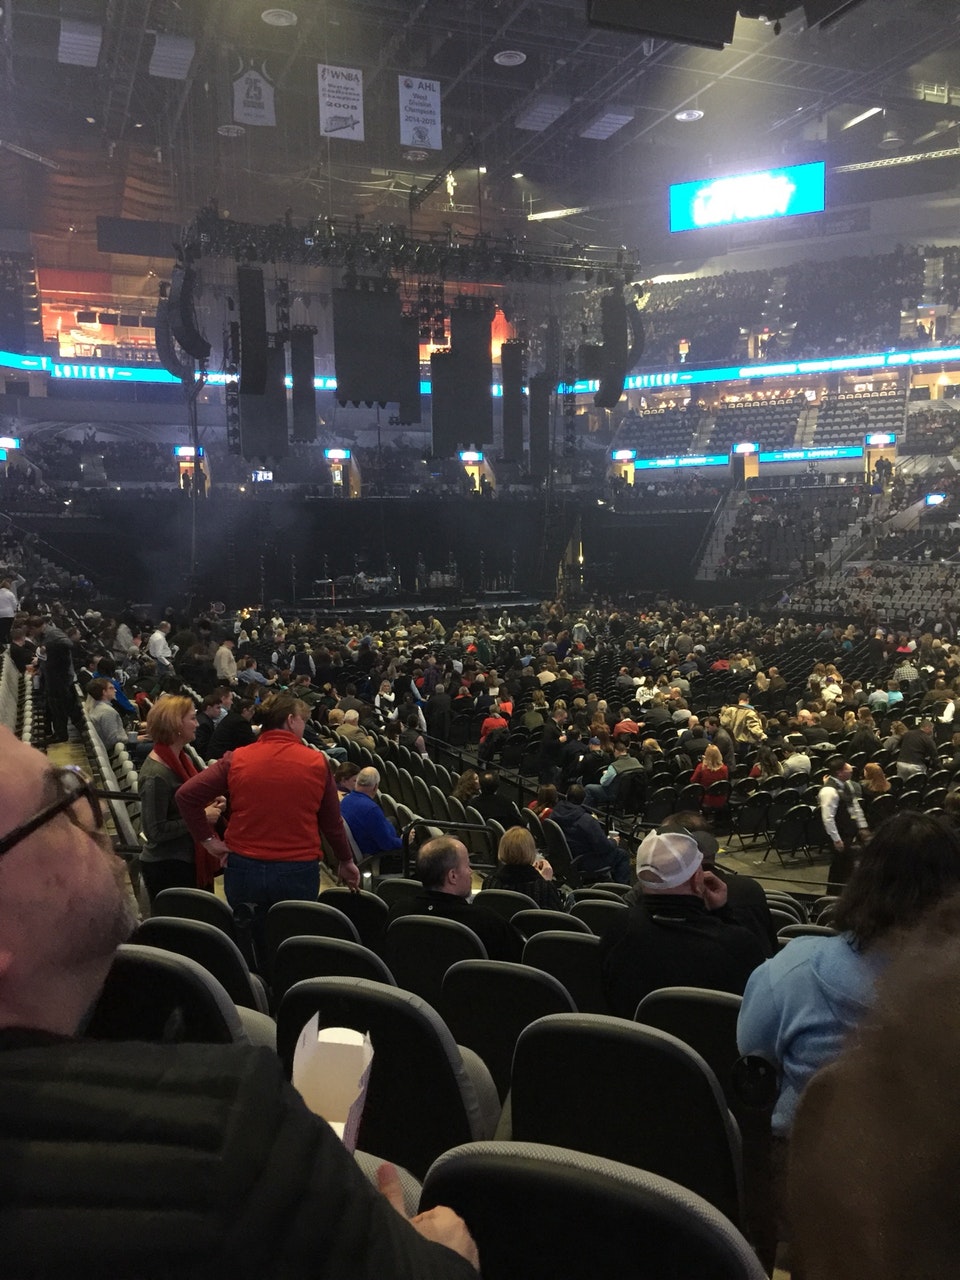 section 104, row 15 seat view  for concert - frost bank center